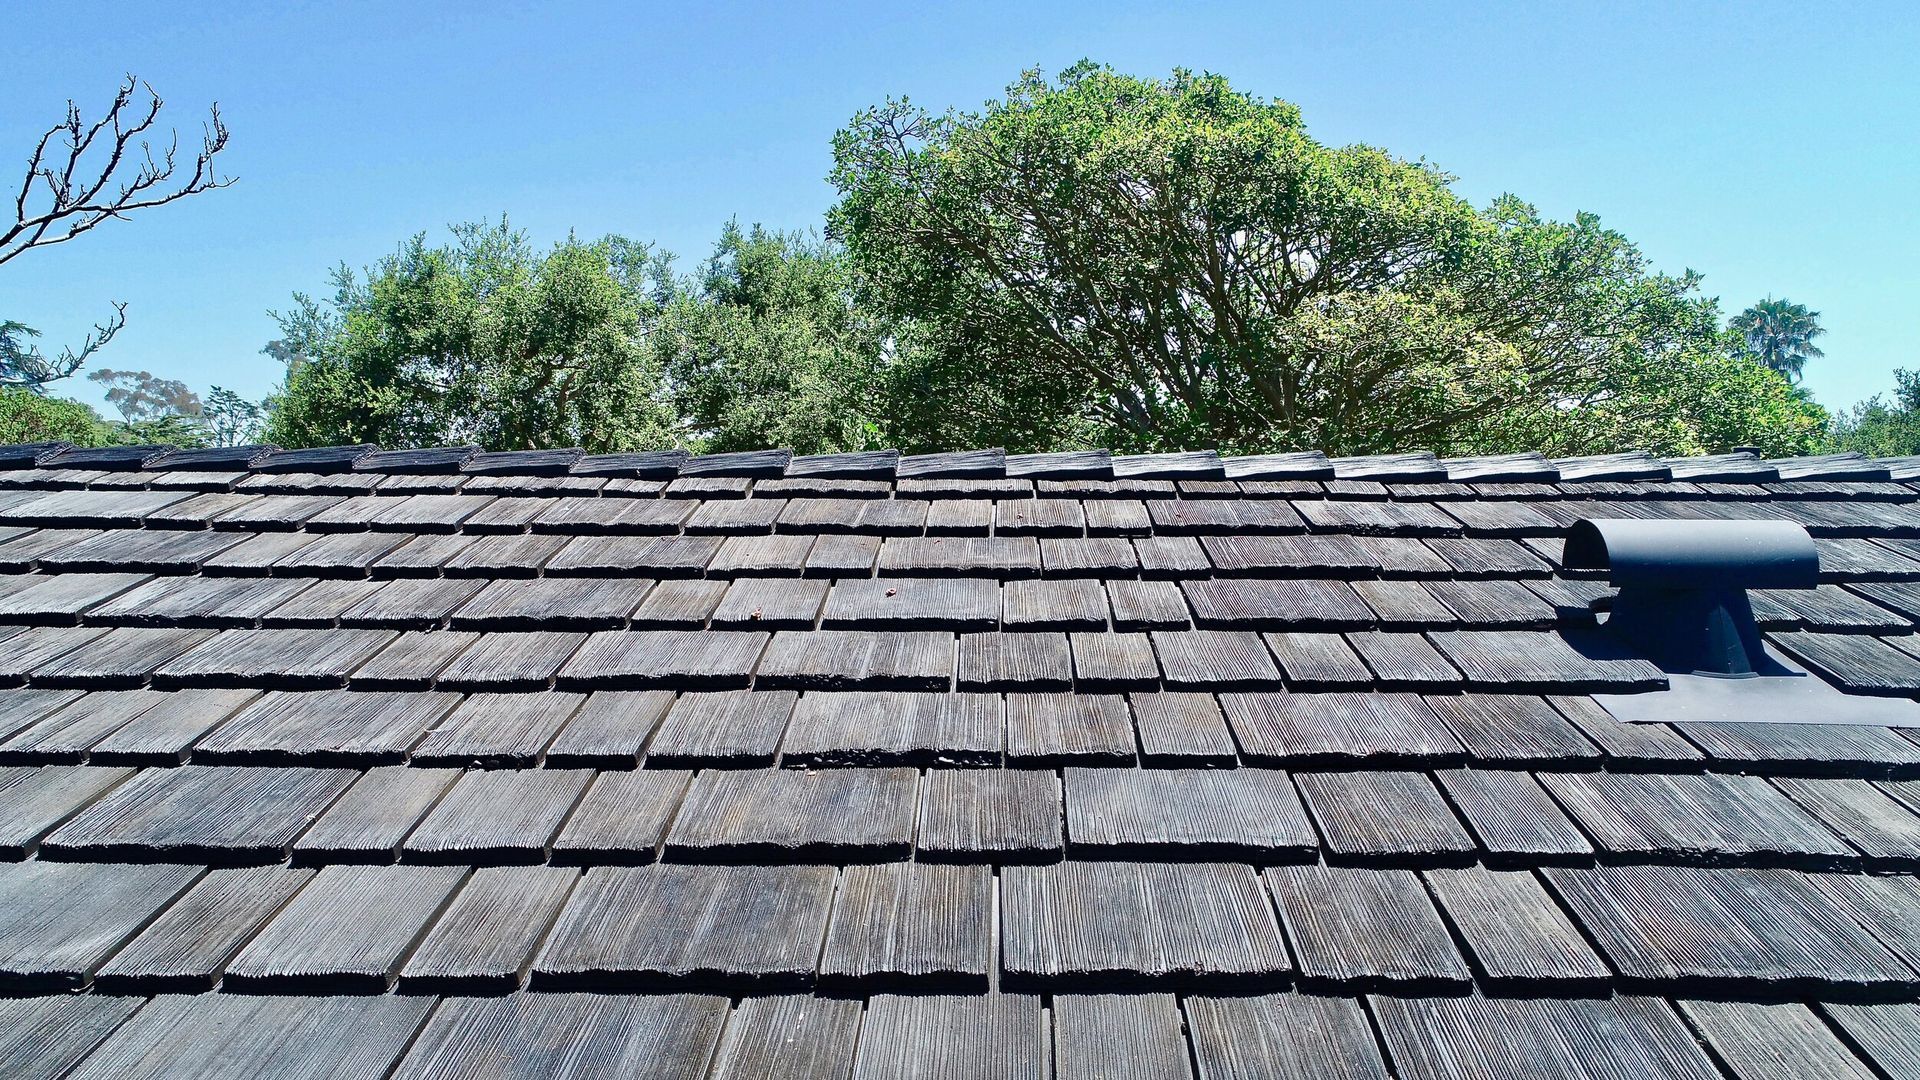 Synthetic+Slate+roofing-Cedar+shake+shingle+roof-Archibeque+roofing+denver